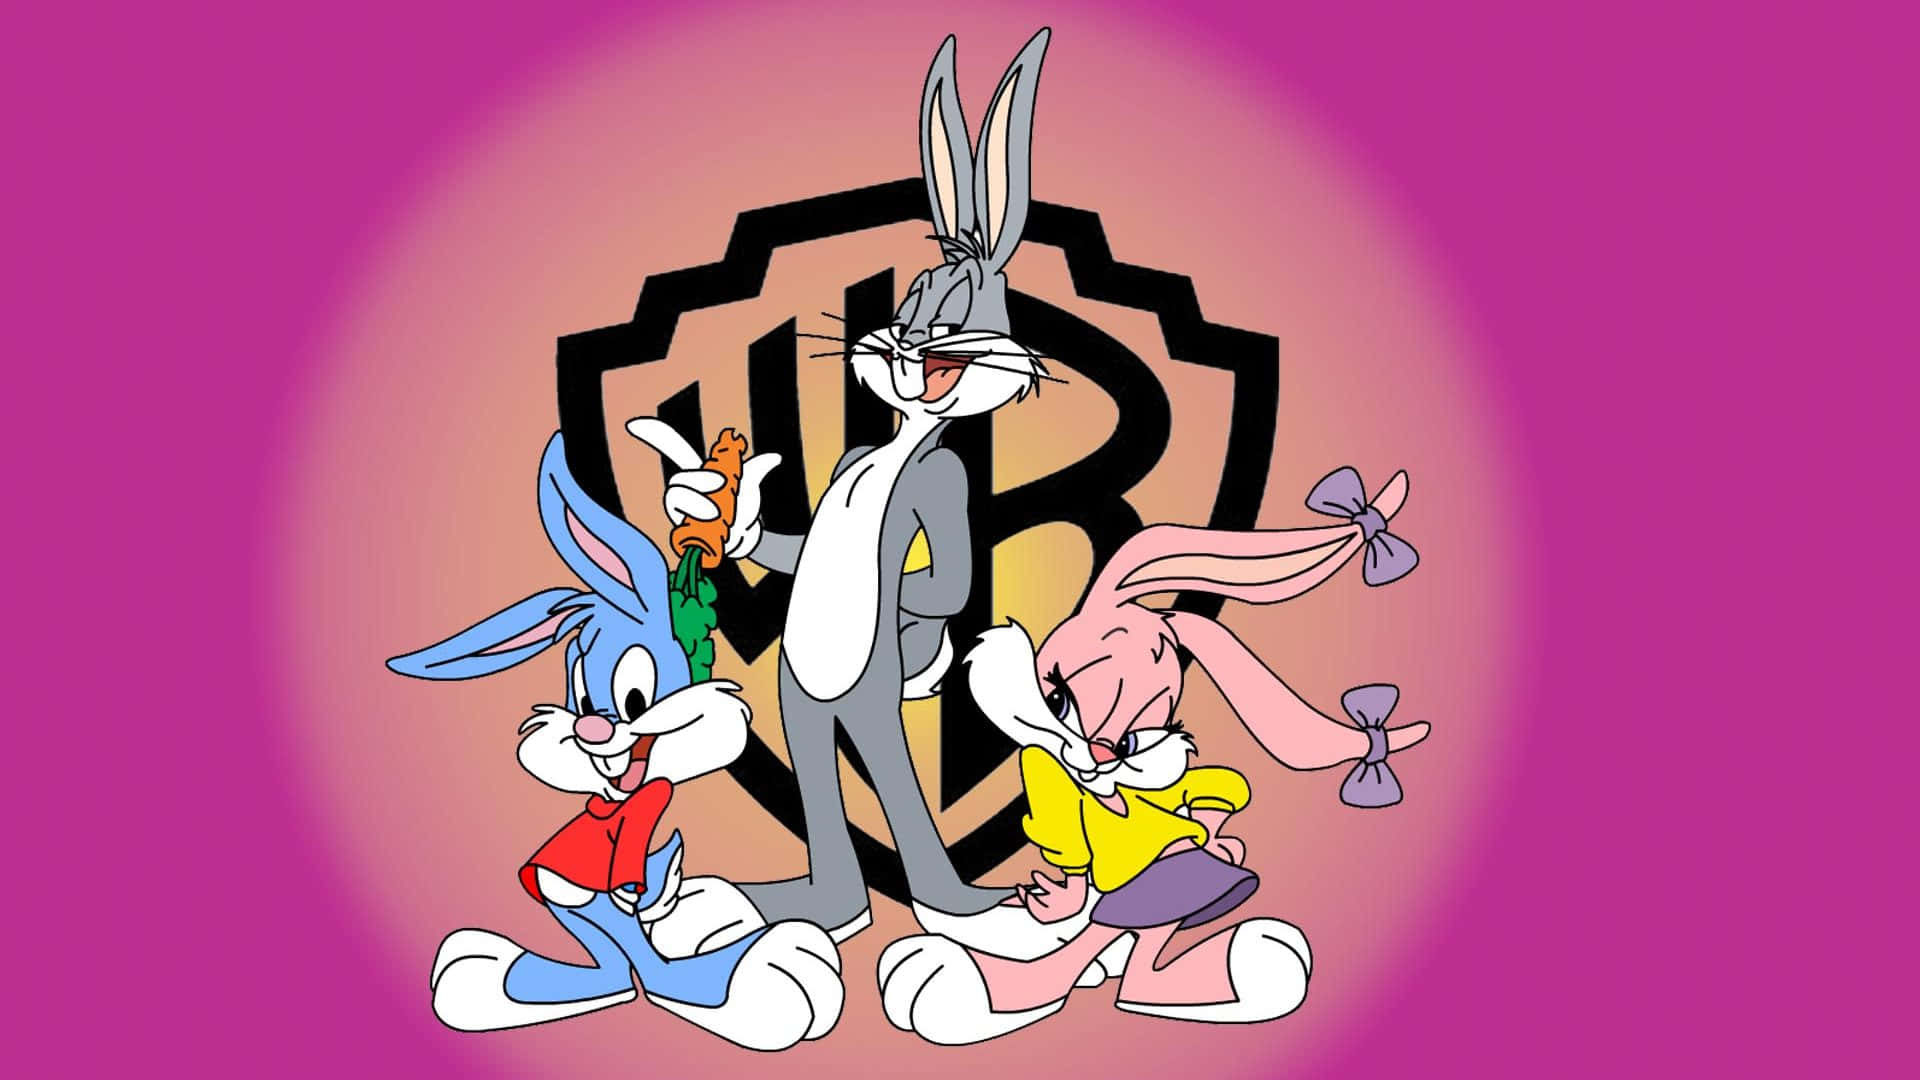 Bugs Bunny brings you this Supreme classic! Wallpaper